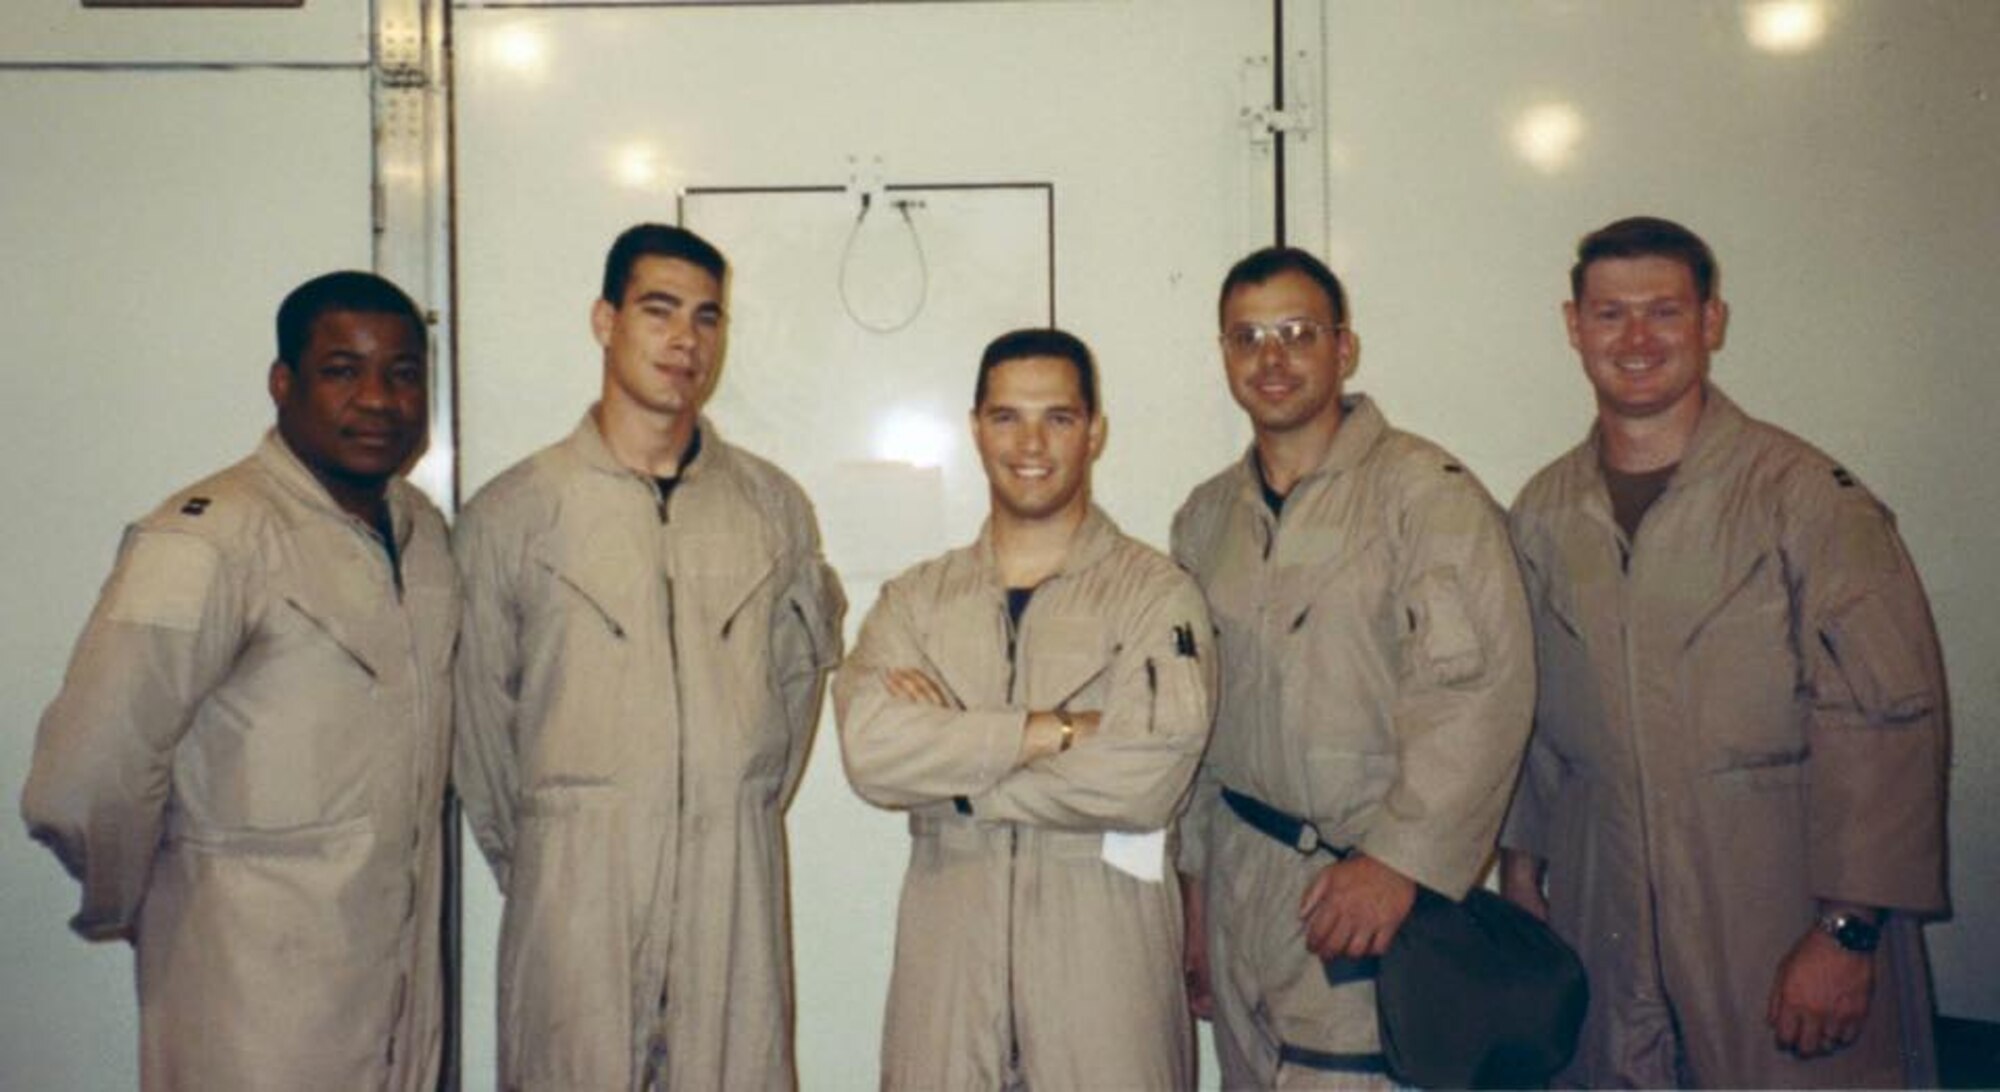 Then 1st Lt. Joey Markusfeld, center, KC-135 Stratotanker copilot, poses for a photo with the rest of his crew, October 2001, during a deployment in support of the war on terrorism. Markusfeld was part of one of five aircrews to deploy from McConnell Air Force Base, Kan., in the month following the 9/11 attacks.  (Courtesy photo)